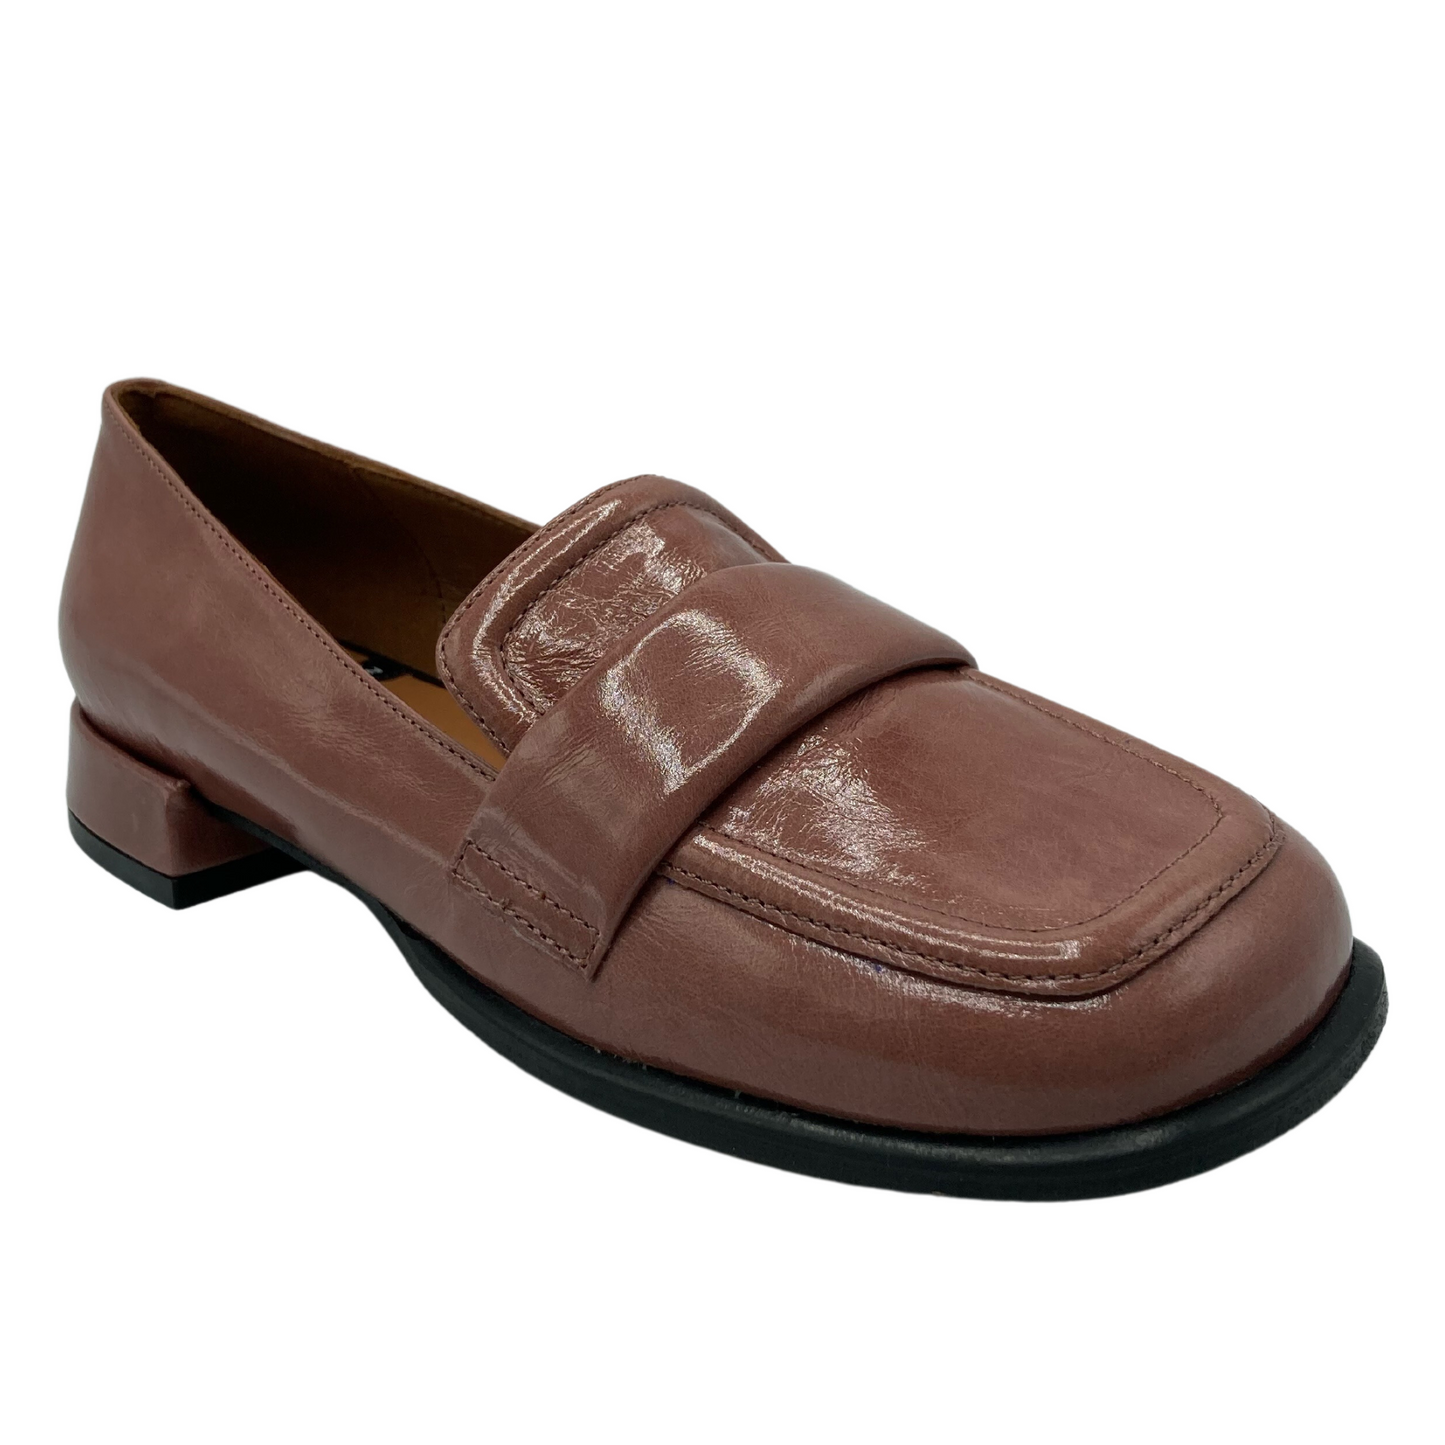 45 degree angled view of brown patent leather loafer with rounded toe and low heel